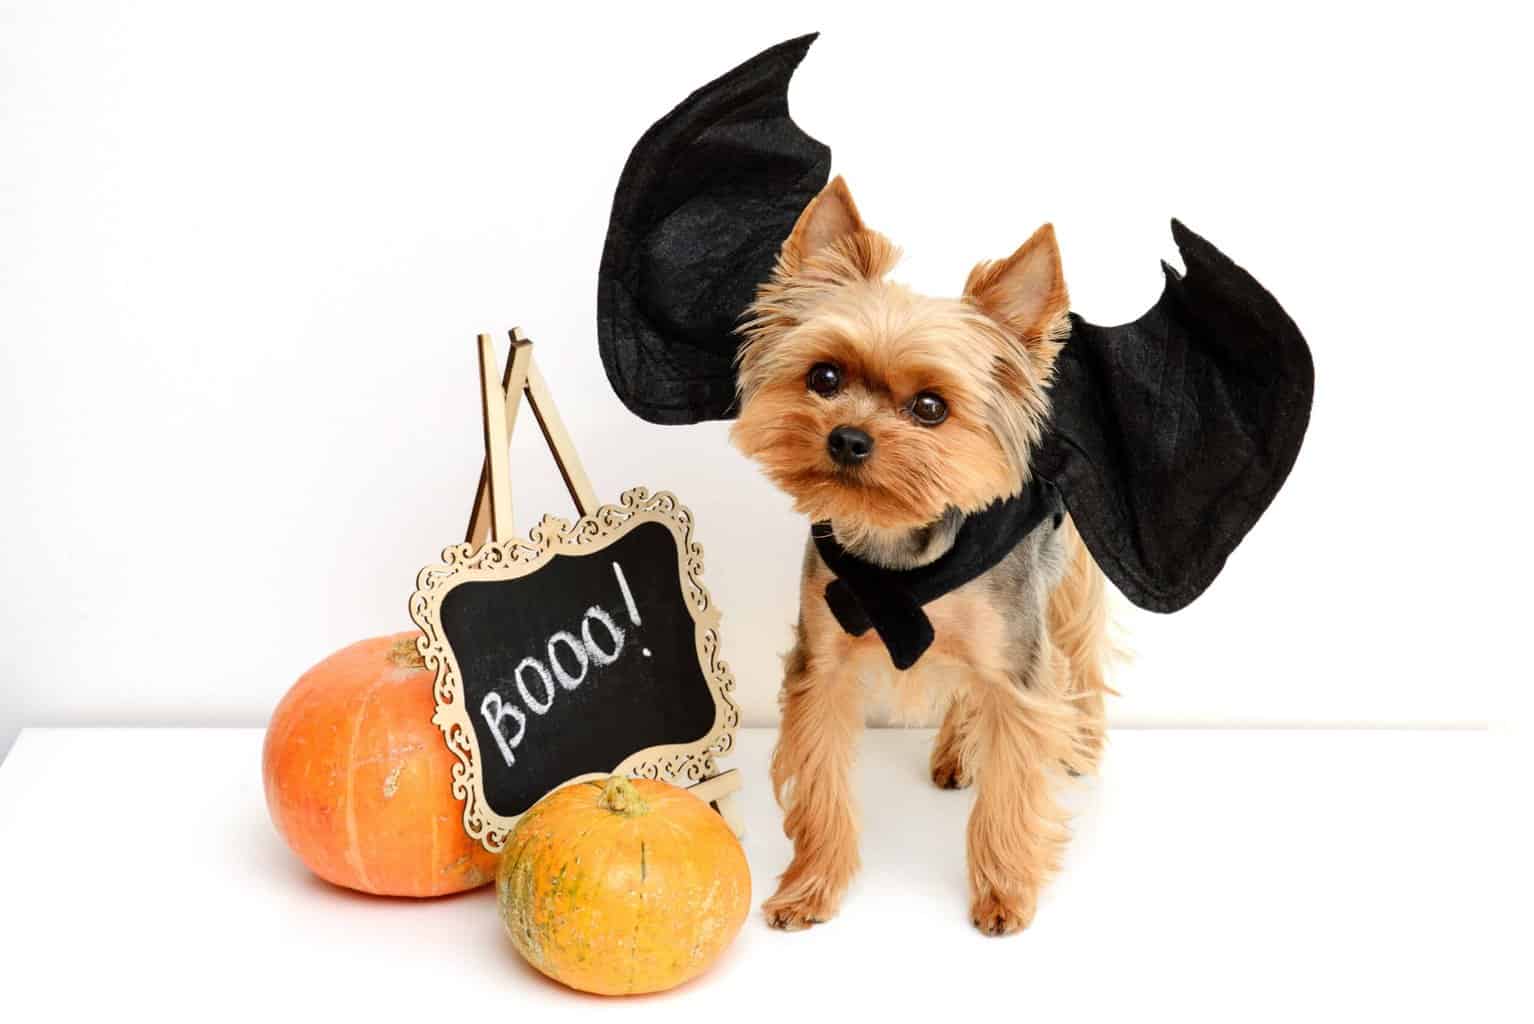 Halloween photo illustration with Yorkshire Terrier. Use basic Halloween dog safety tips. To prevent injuries, keep decorations, lights, candles and candy out of your dog's reach.